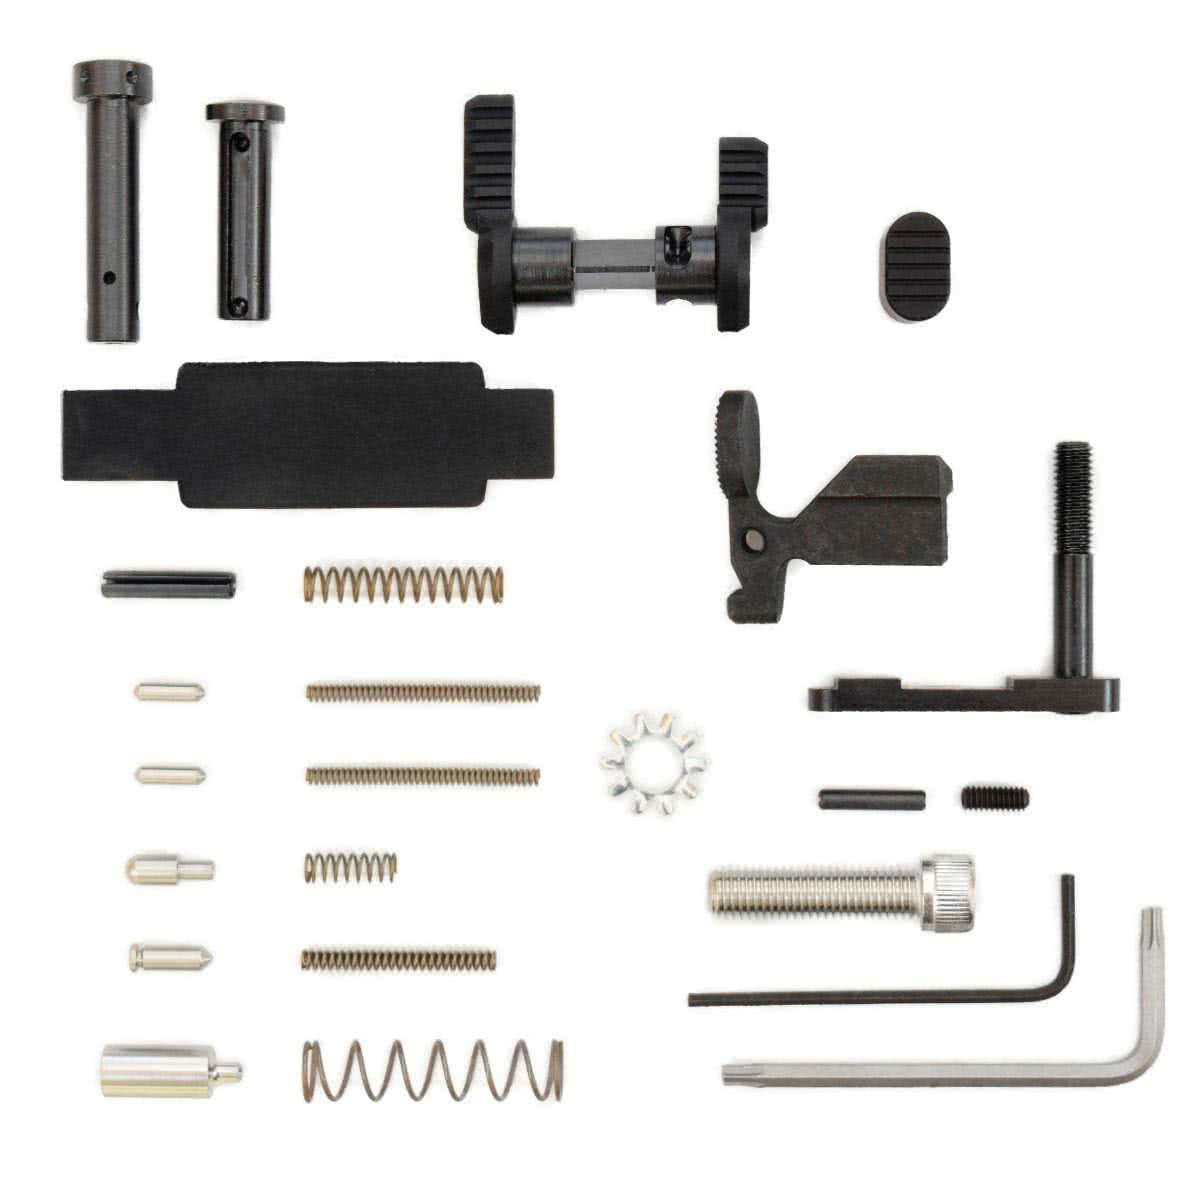 ARMASPEC - AR-15 STAINLESS LOWER PARTS KITS .223/5.56